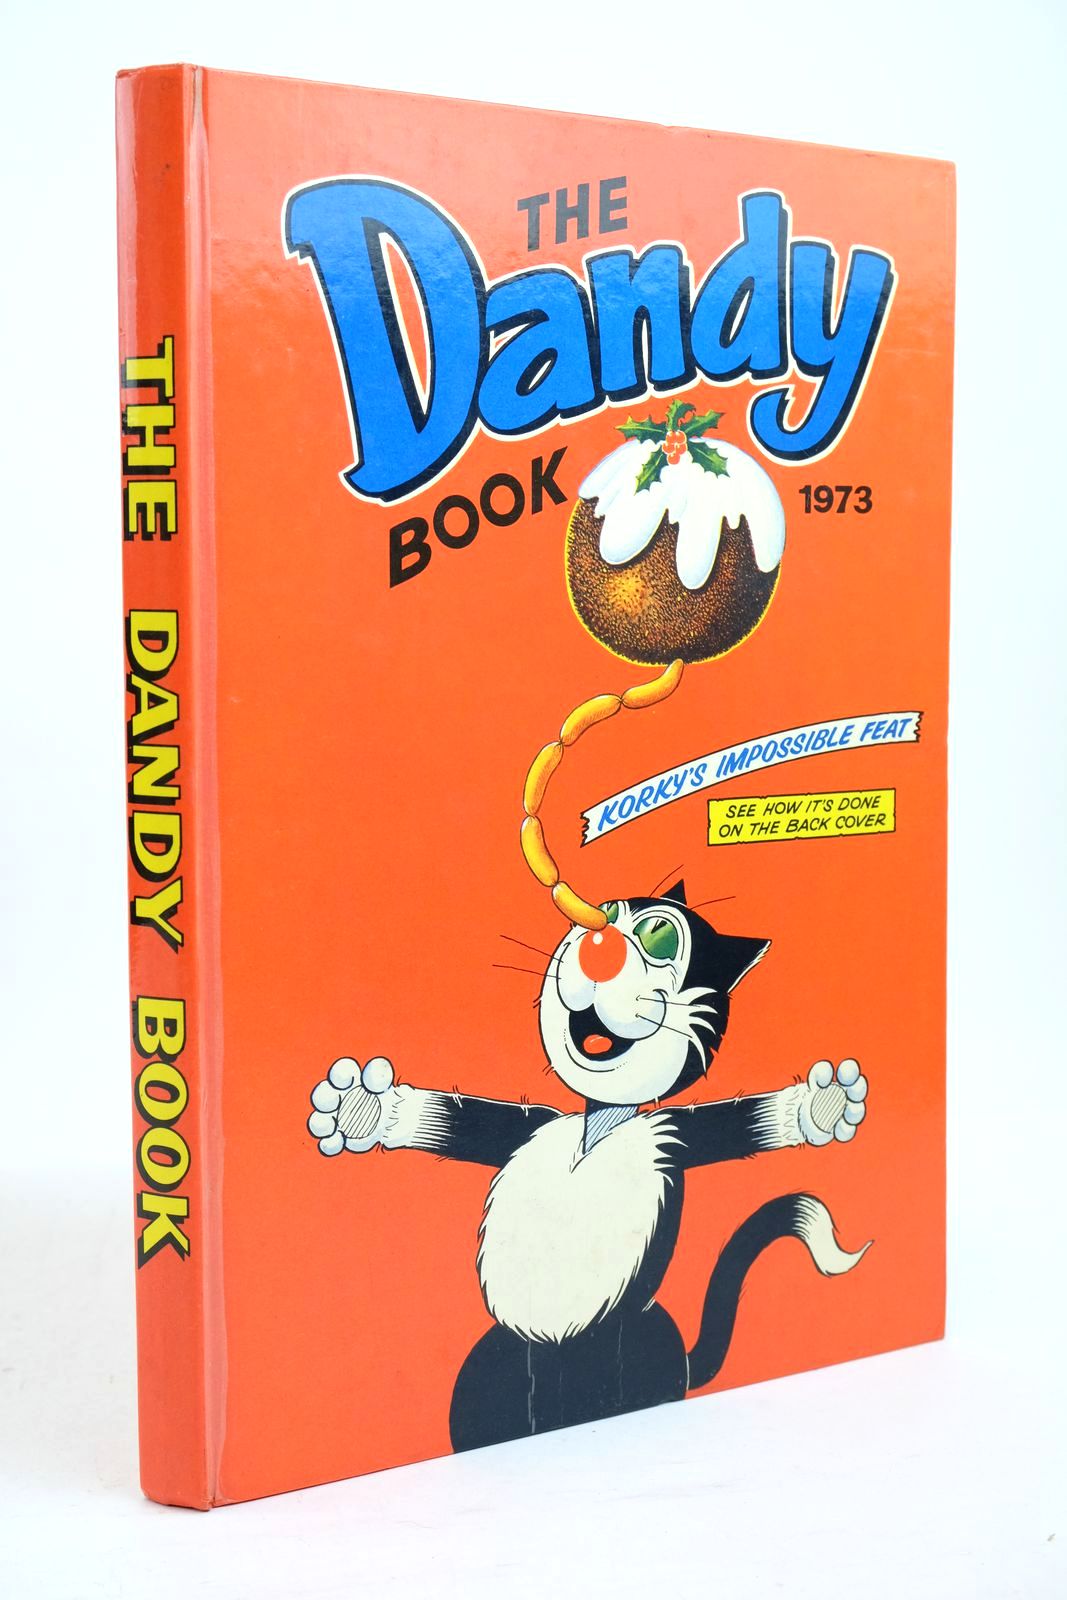 Photo of THE DANDY BOOK 1973 published by D.C. Thomson & Co Ltd. (STOCK CODE: 1321202)  for sale by Stella & Rose's Books